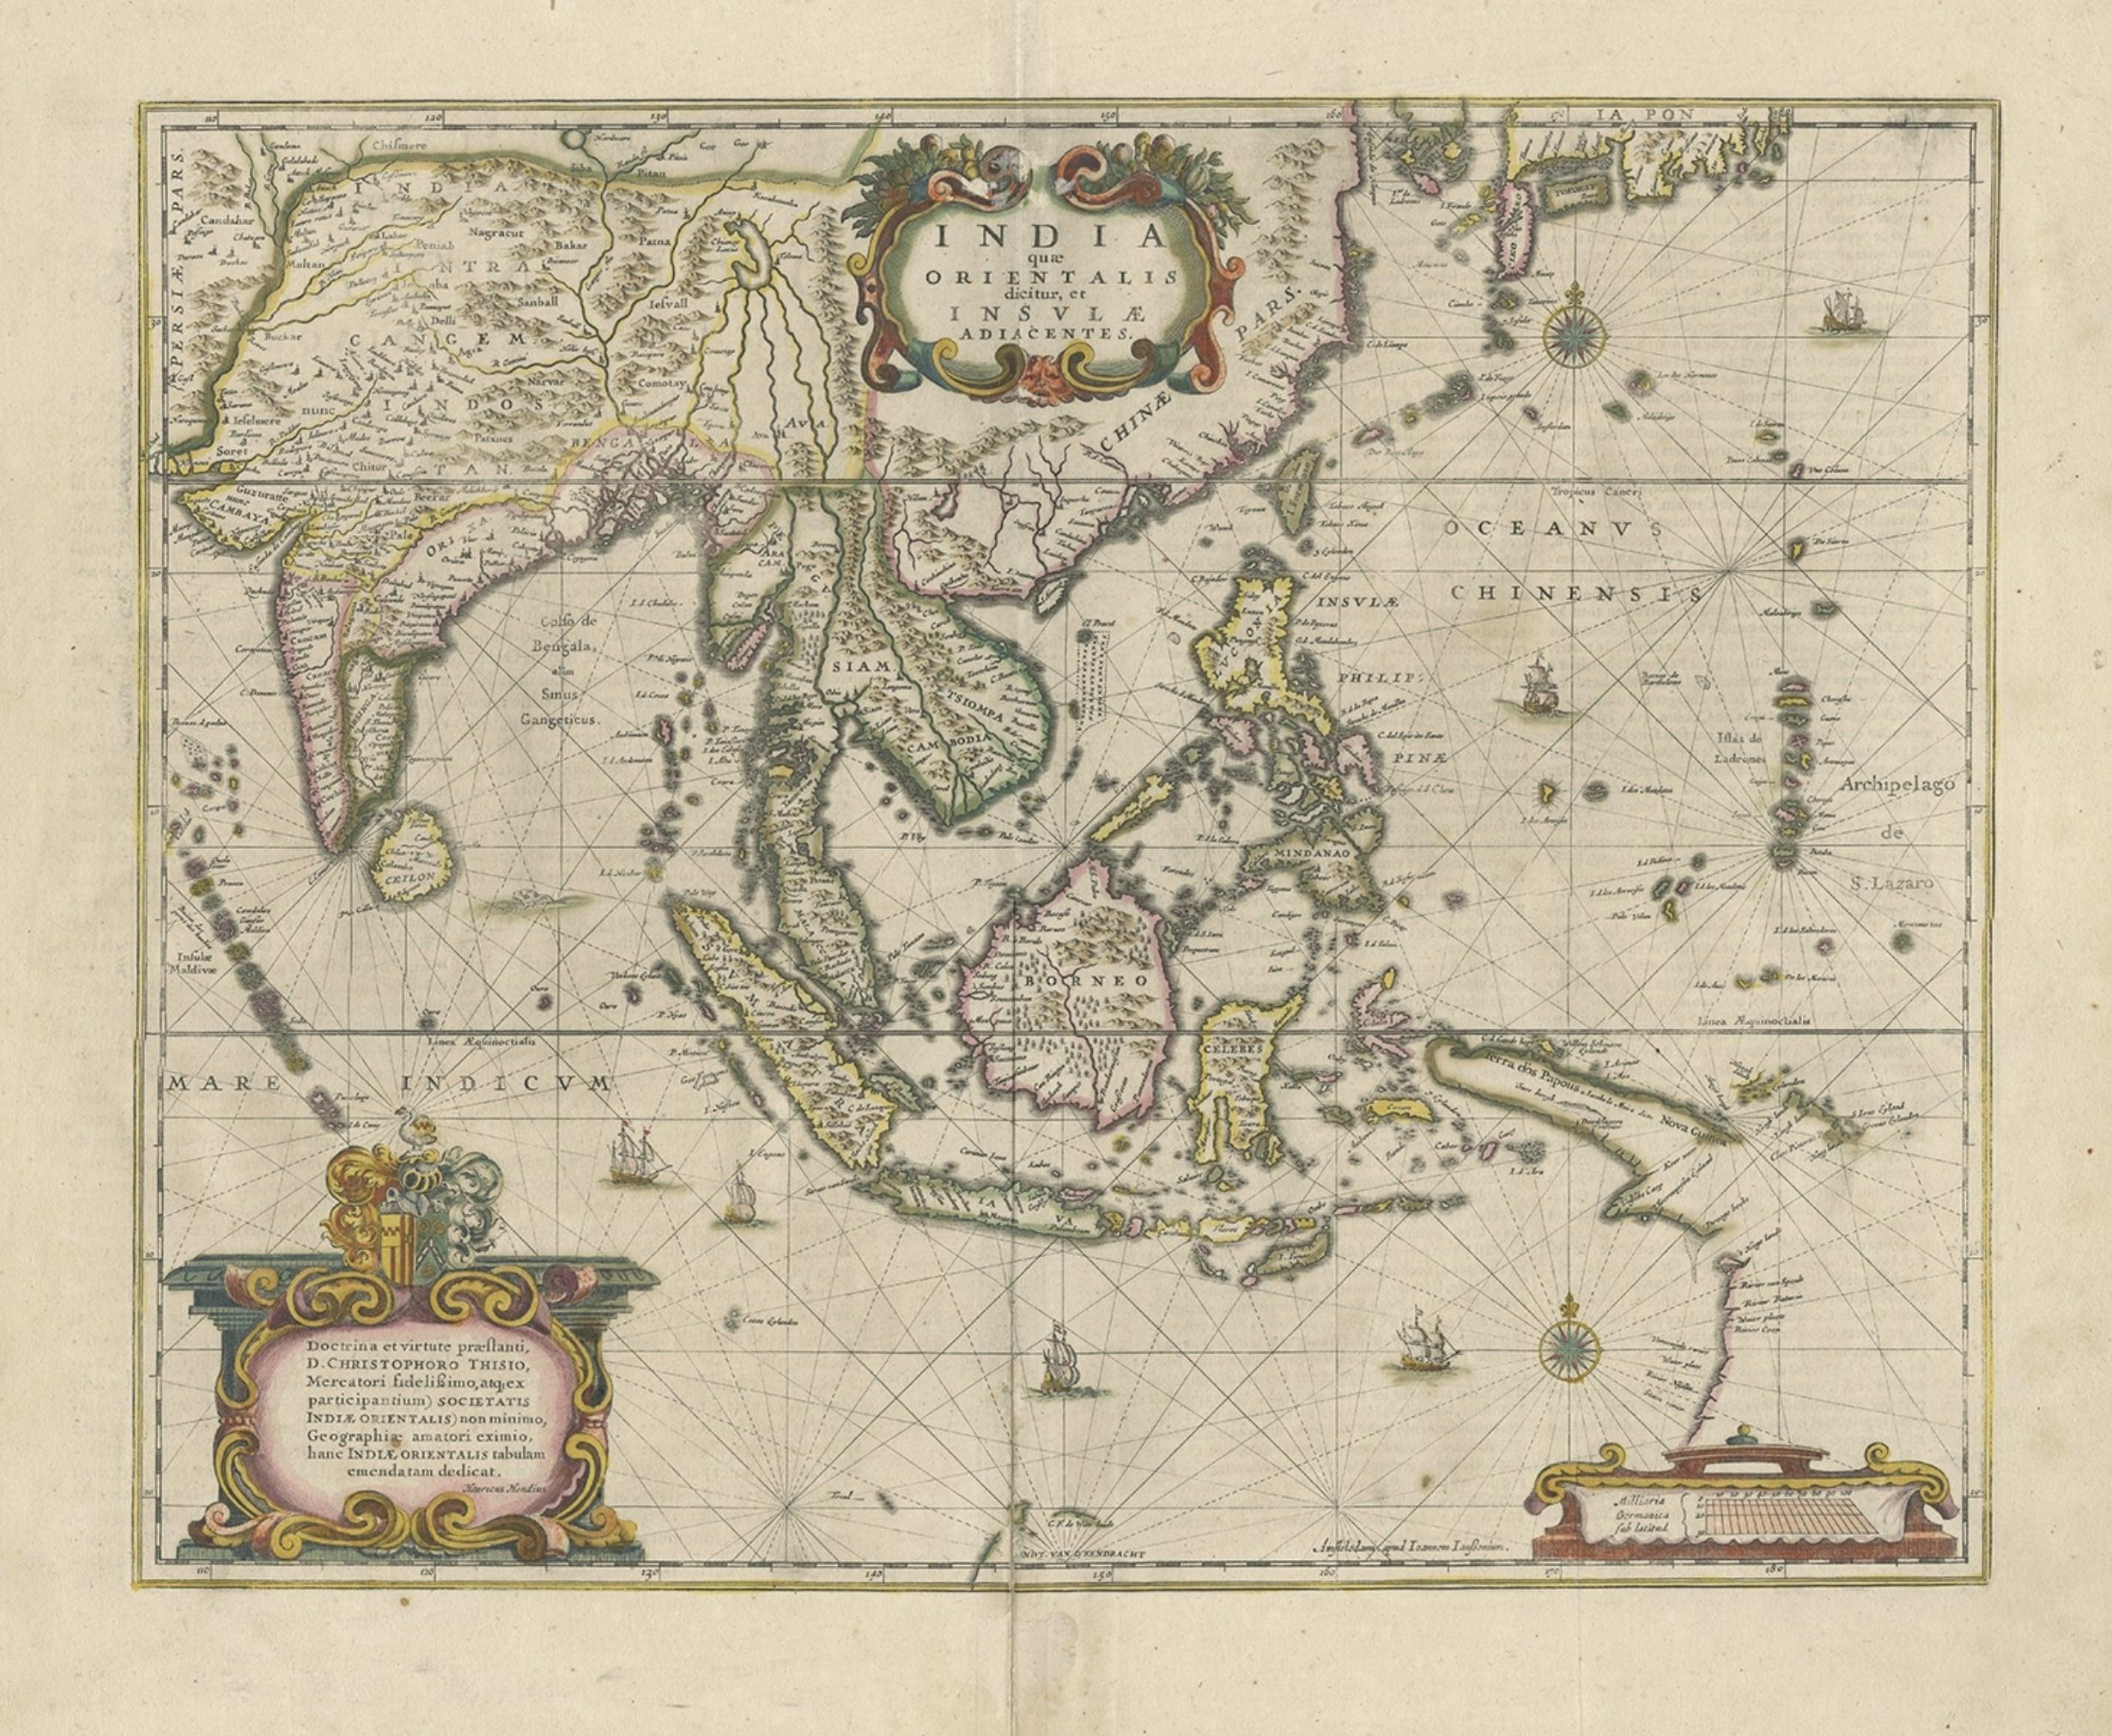 Antique map titled 'India quae Orientalis dicitur, et Insulae adiacentes'. 

Old map of the East Indies and Southeast Asia showing the area between India in the West and parts of Japan, the Marianas and New Guinea/Australia in the East. This map is